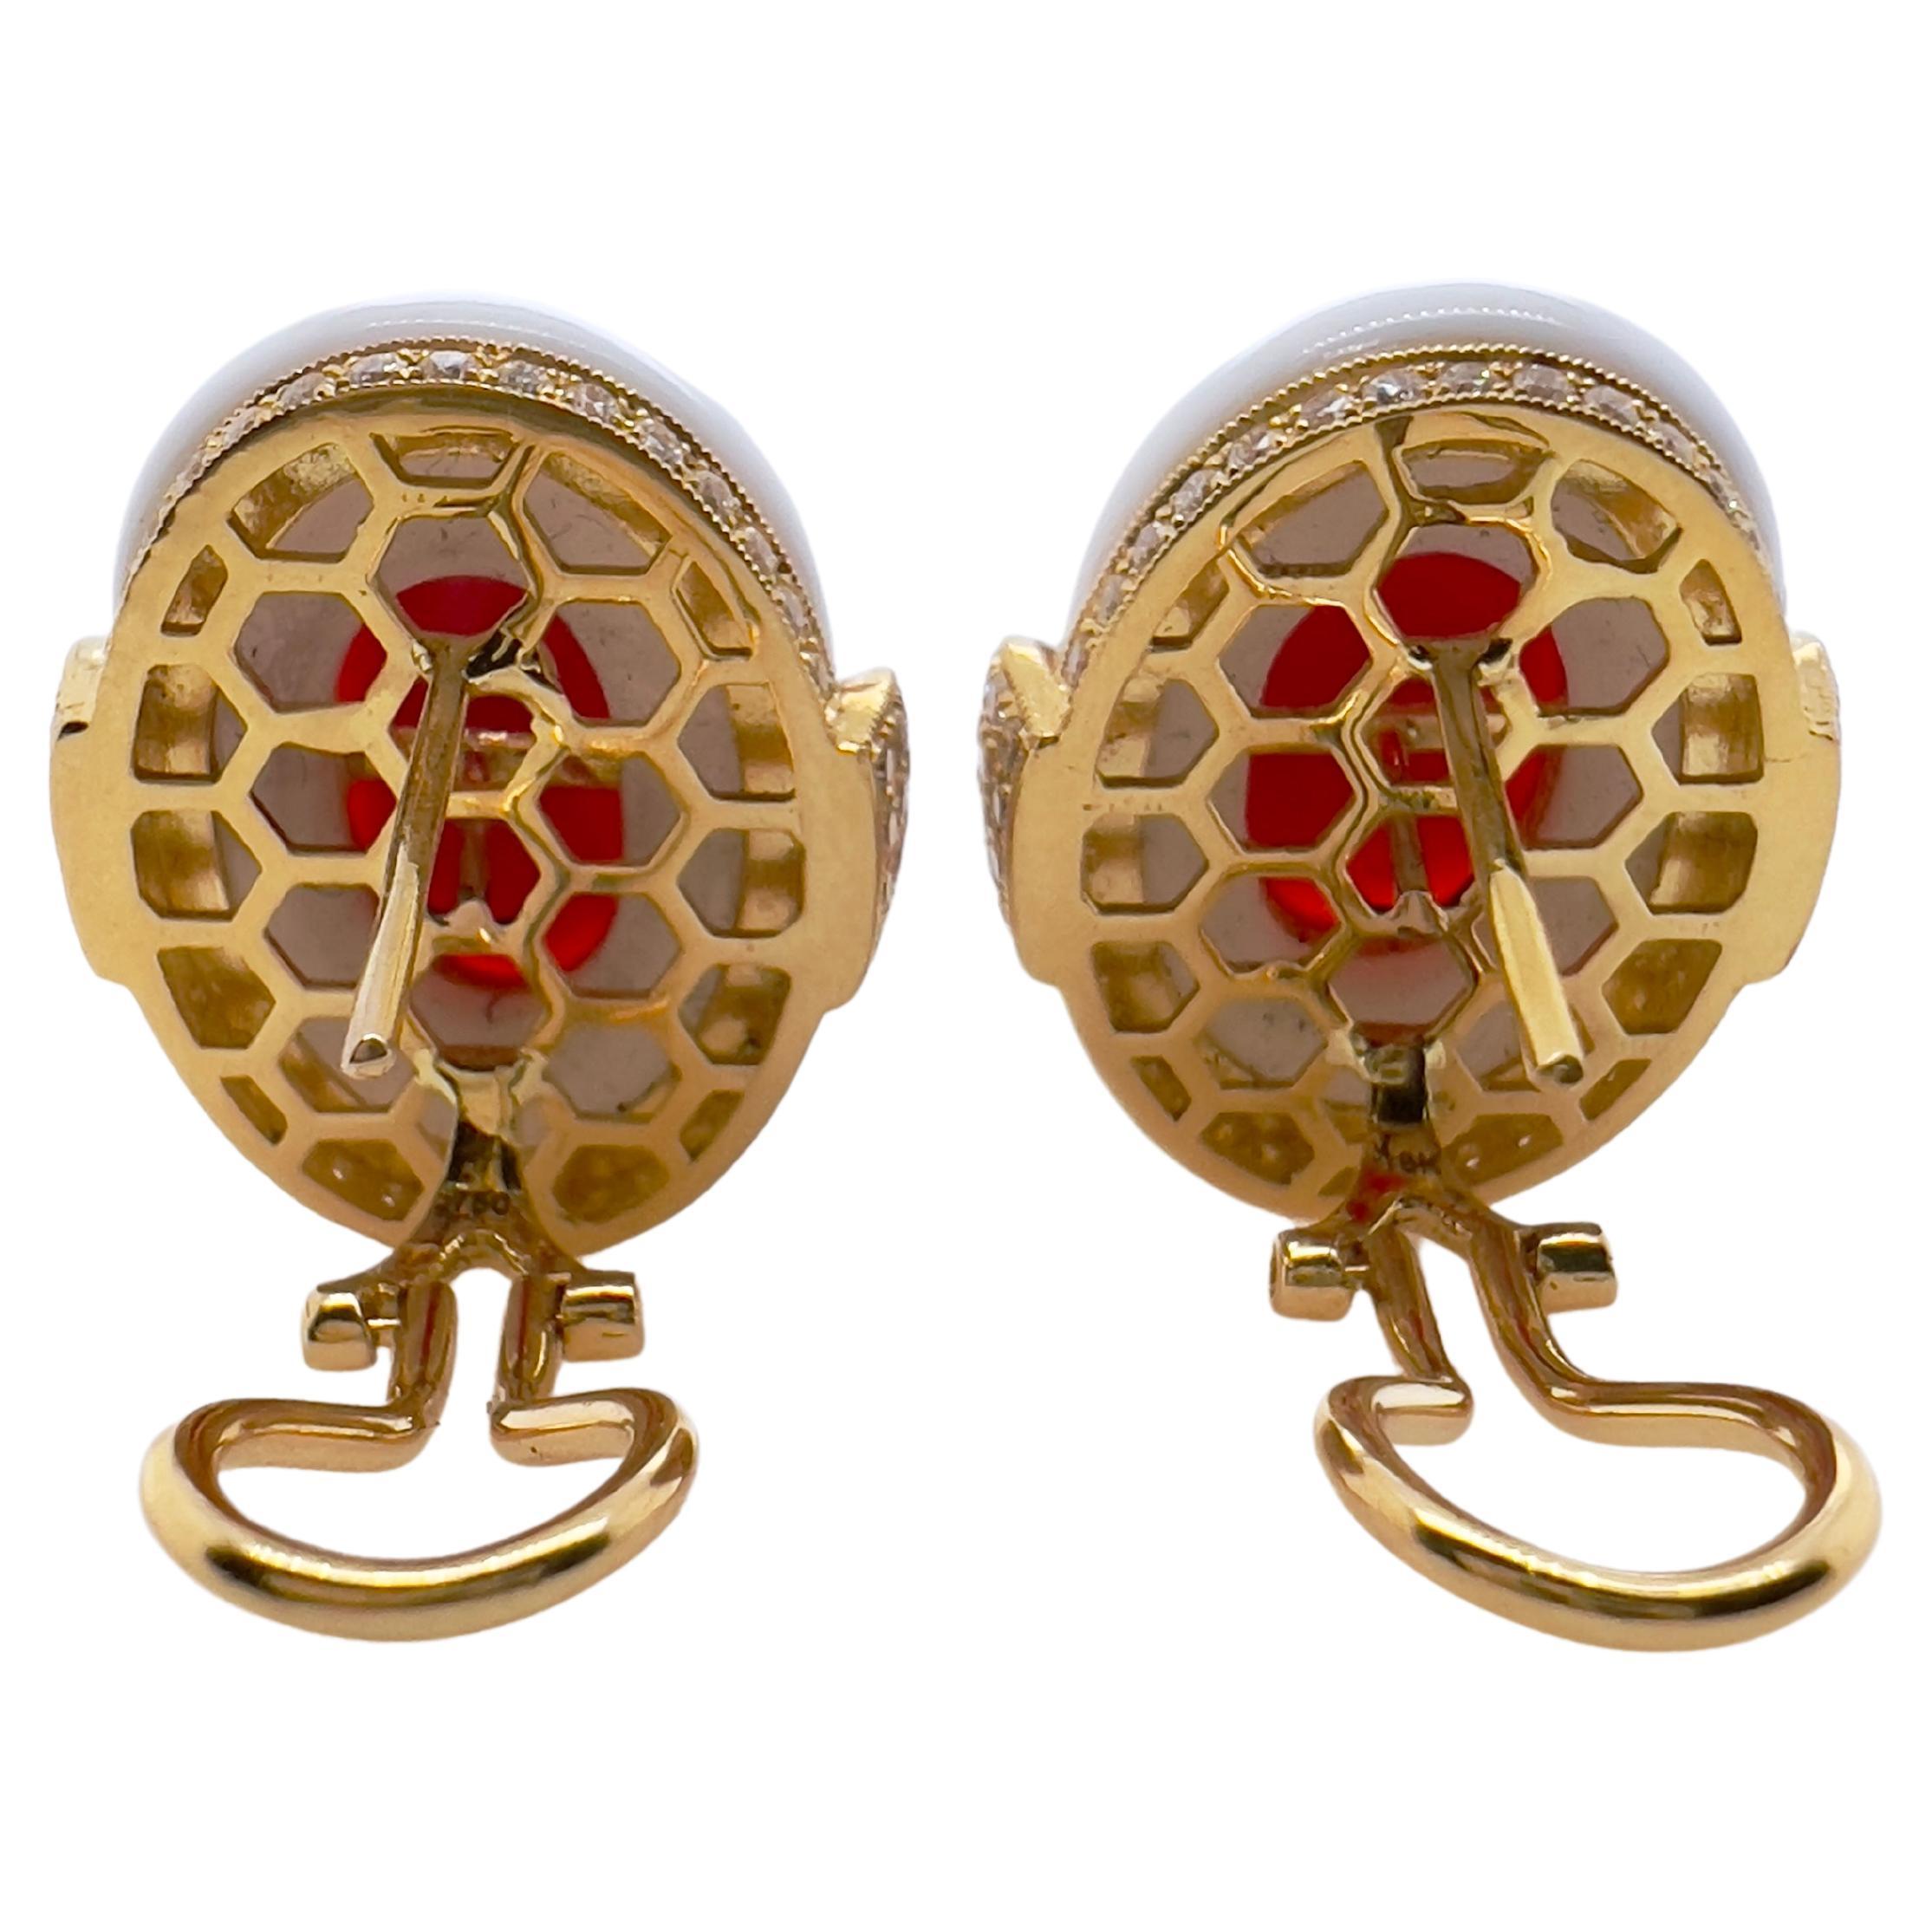 This gorgeous handmade earrings will be the talk of the town.  The amazing coral is vibrant in color and luster.  It is set in the middle of a custom white agate that is strategically placed in an 18k yellow gold setting with diamonds.  The unique